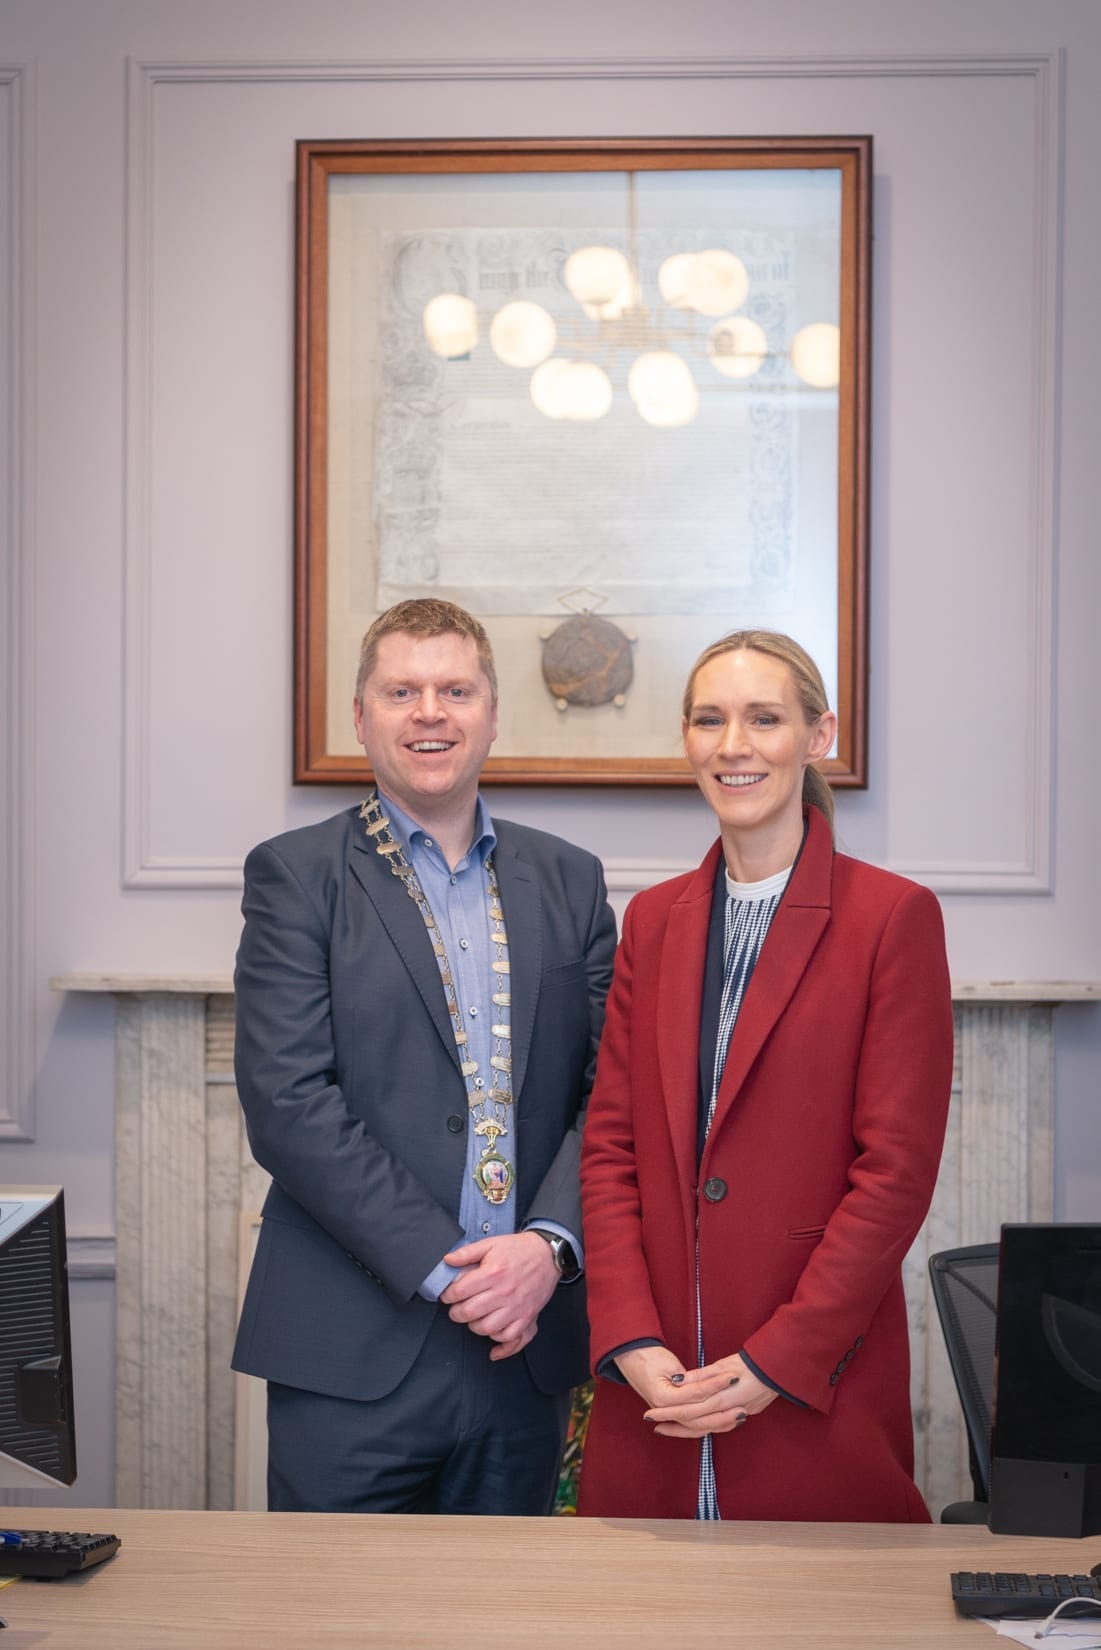 No repro fee-Limerick Chamber AGM 2020 which was held in Limerick Chamber Boardroom on Thursday 27th February - From Left to Right:  Eoin Ryan - President Limerick Chamber, Dee Ryan - CEO Limerick Chamber, 
Photo credit Shauna Kennedy